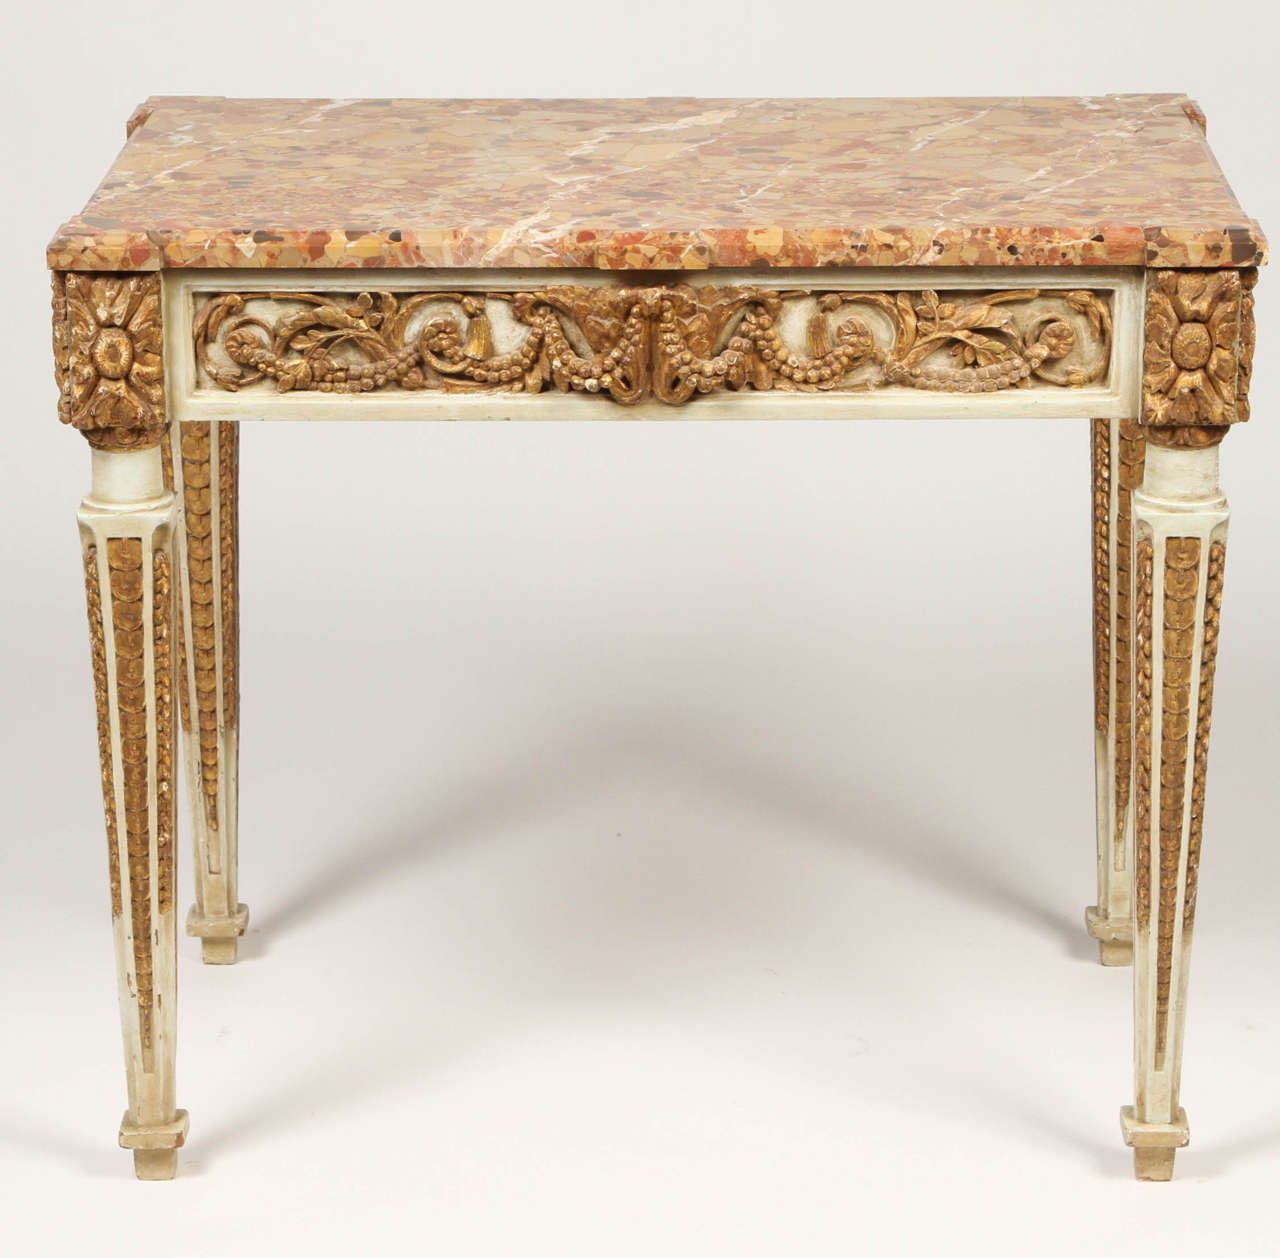 Wonderful Italian console table from the late 18th century that has been heavily carved with winding foliated scrolls and acanthus leaves. The finely tapered and reeded legs are carved with great detail and topped with cornered rosettes. The gilt